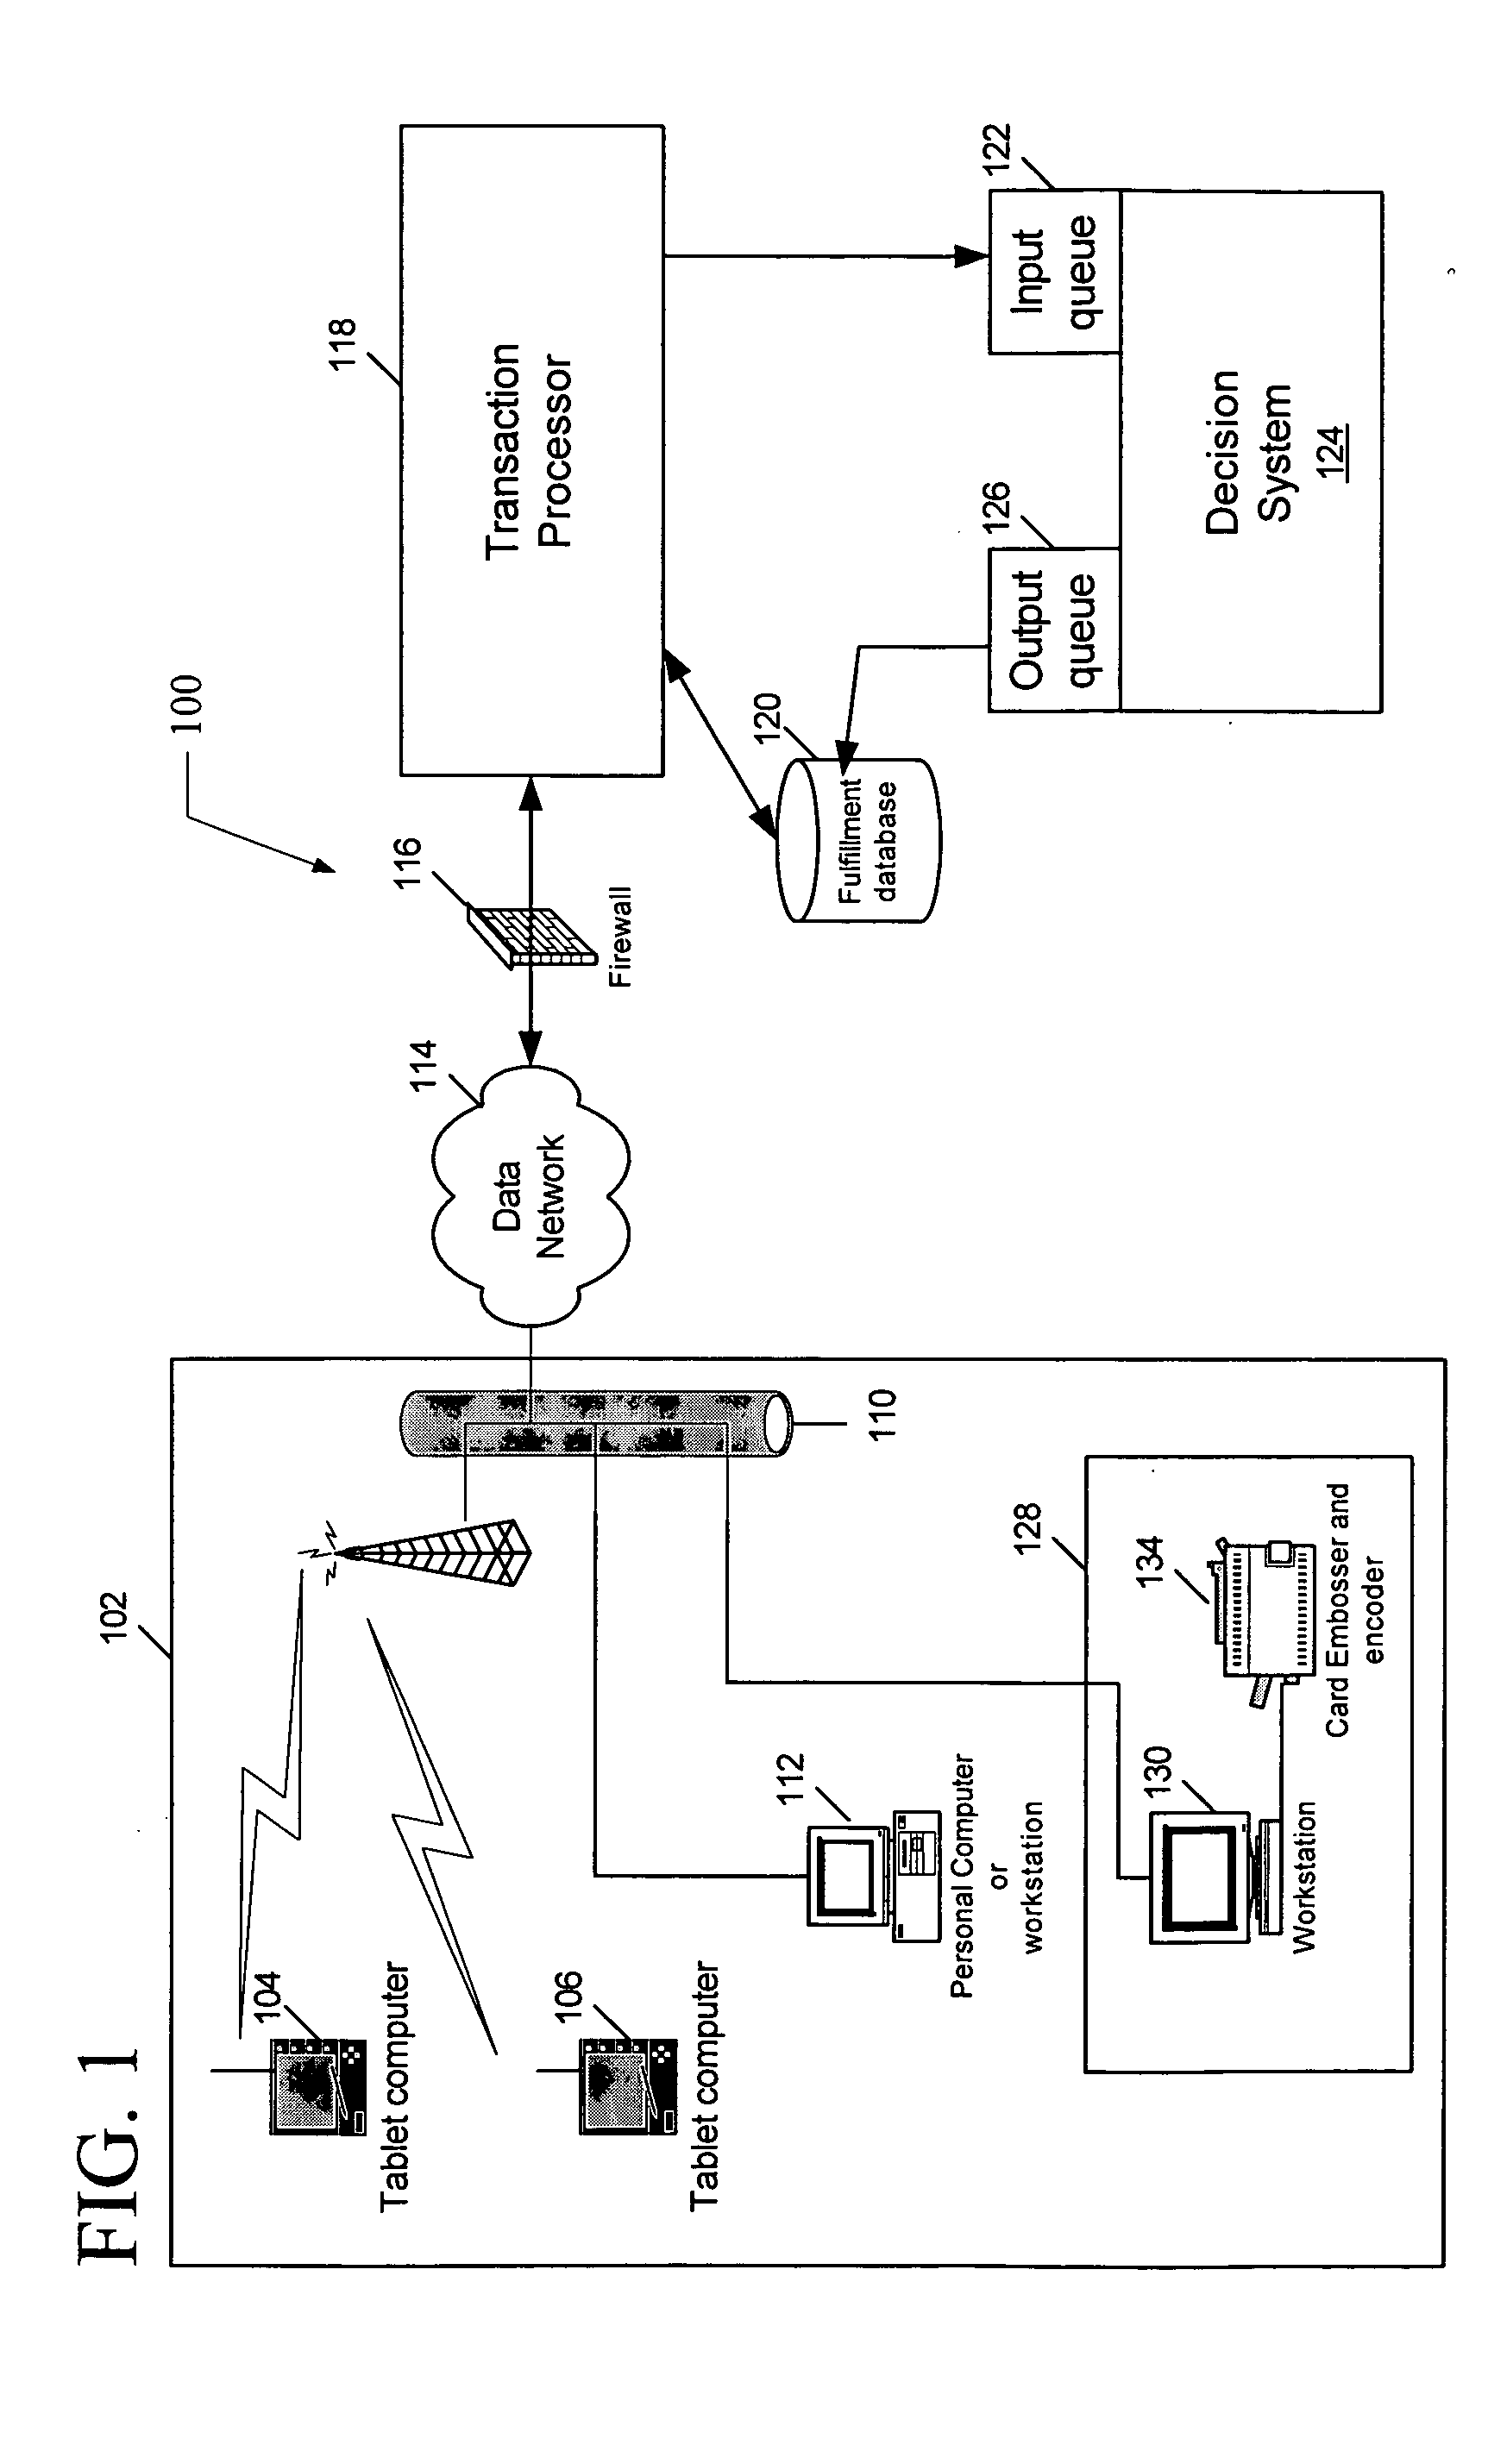 System and method for providing instant-decision, financial network-based payment cards